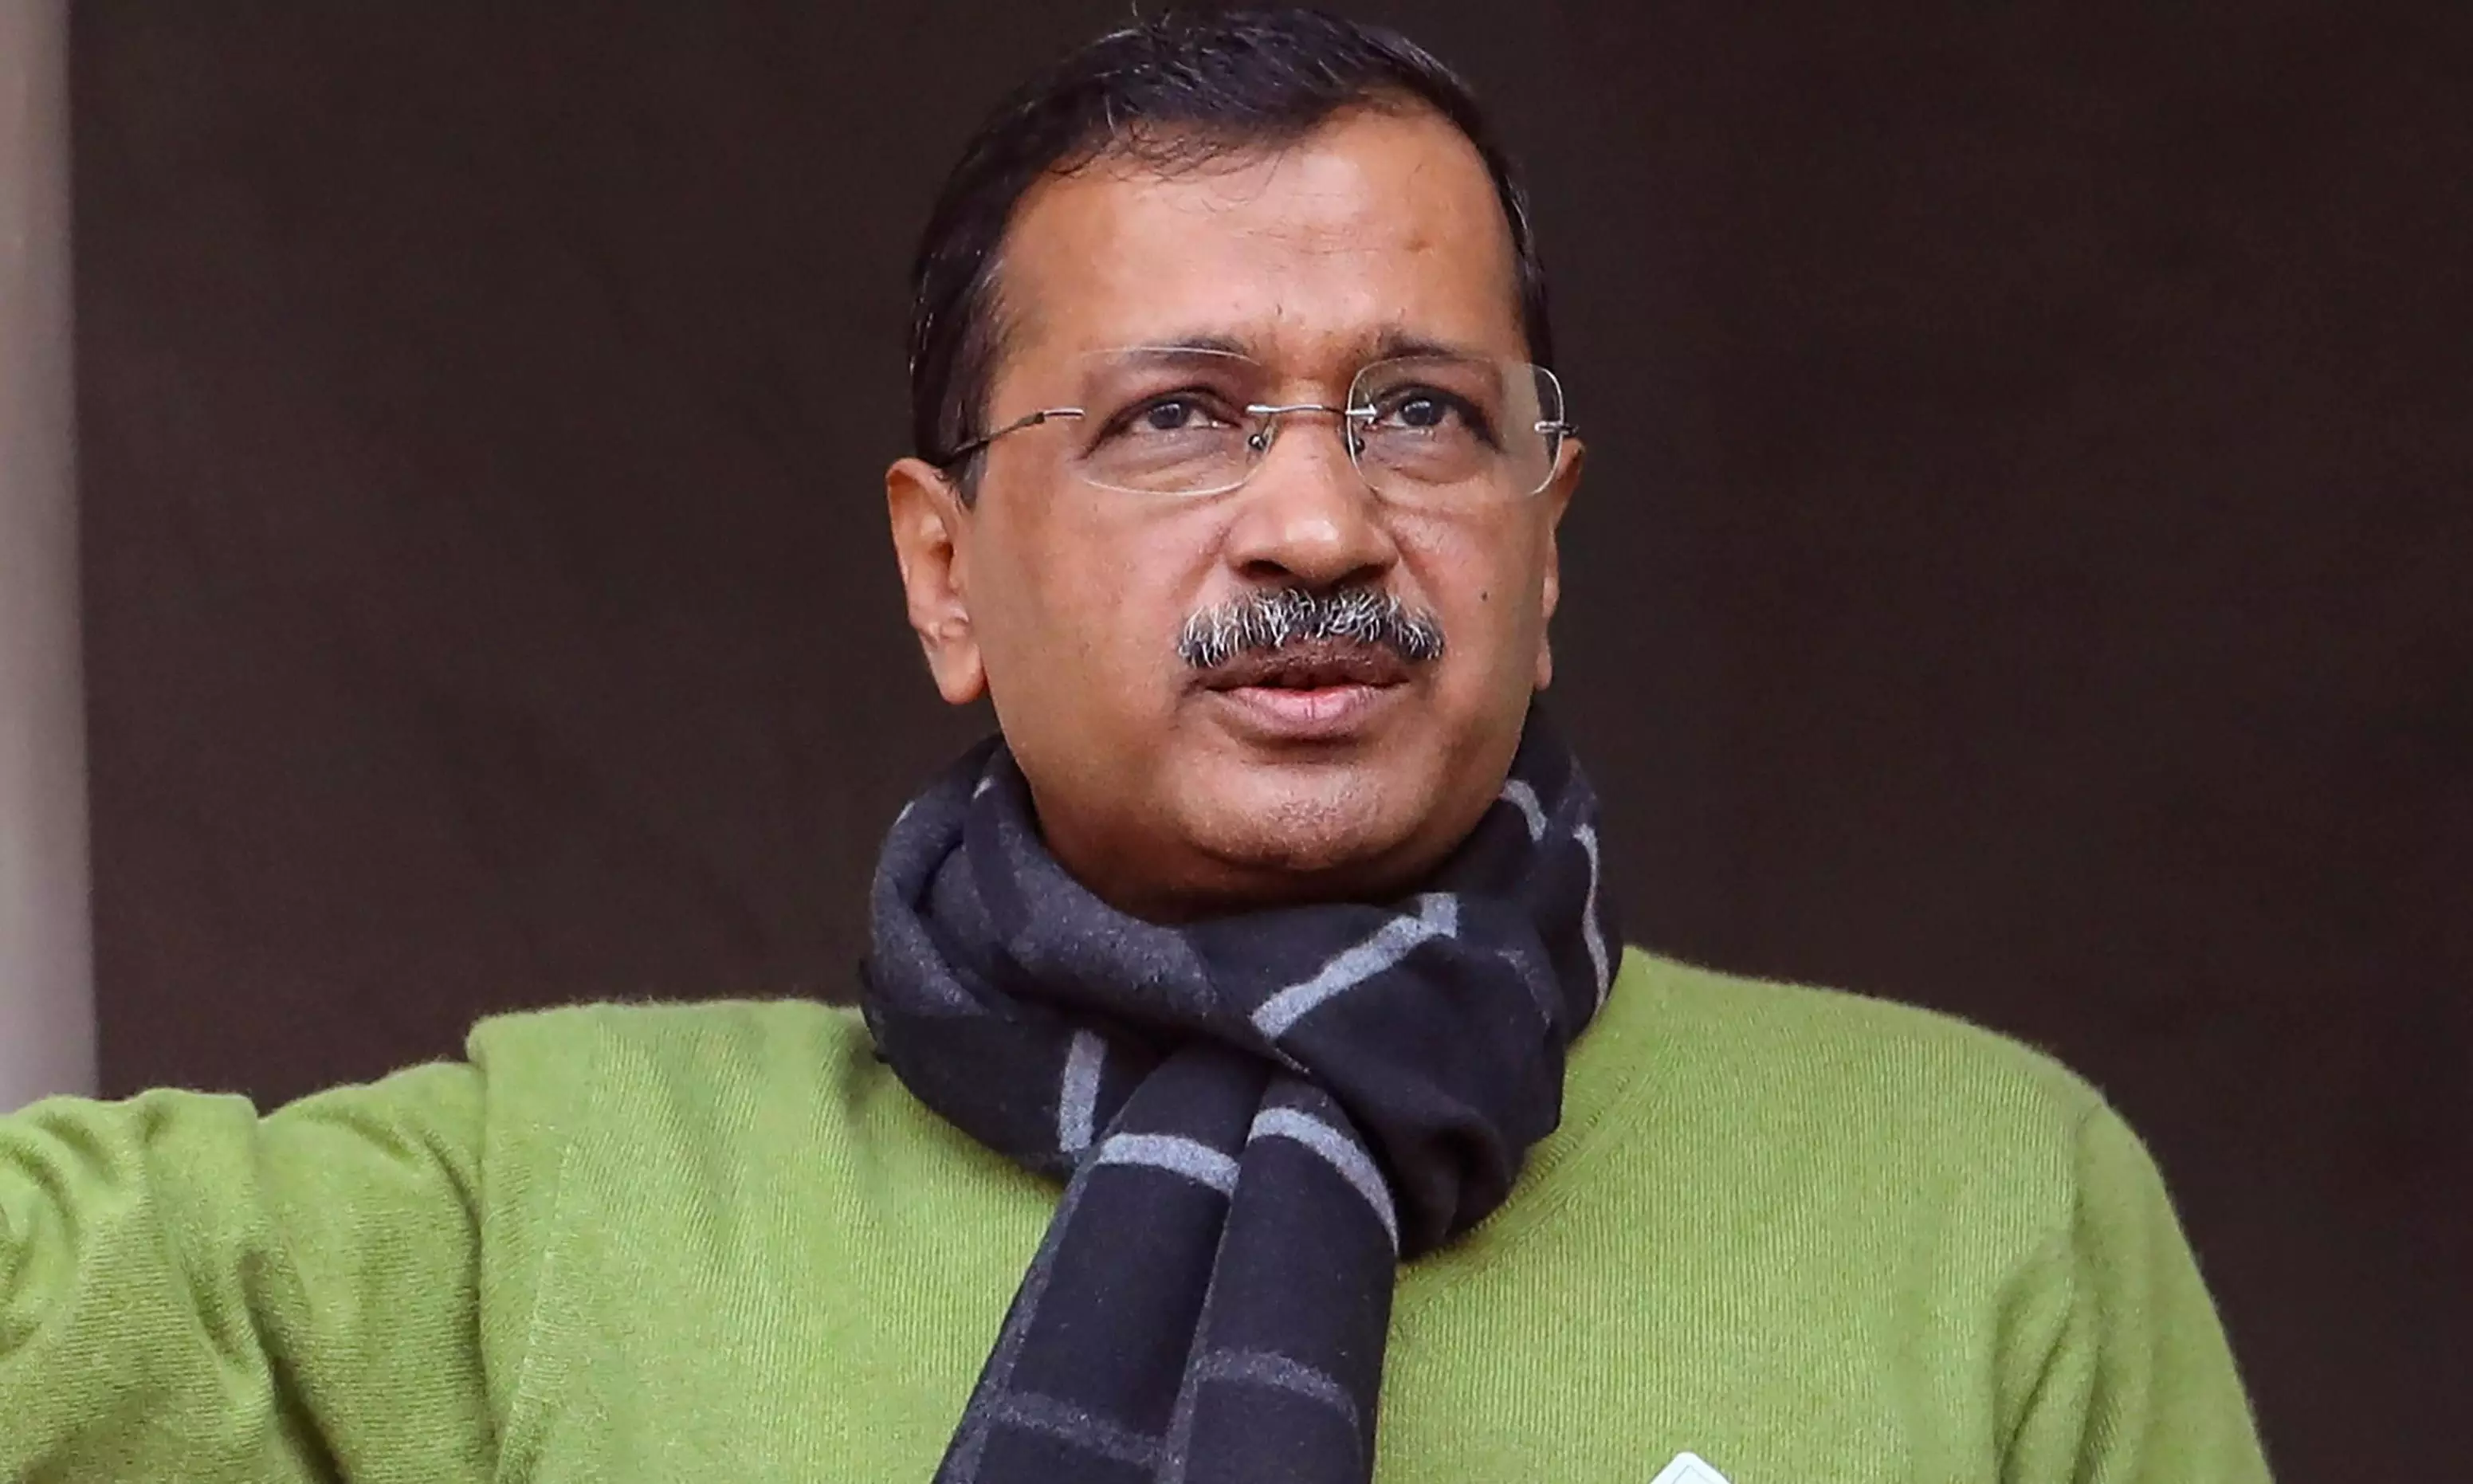 Kejriwal ‘ready to answer’ ED questions by video call; agency says no such provision